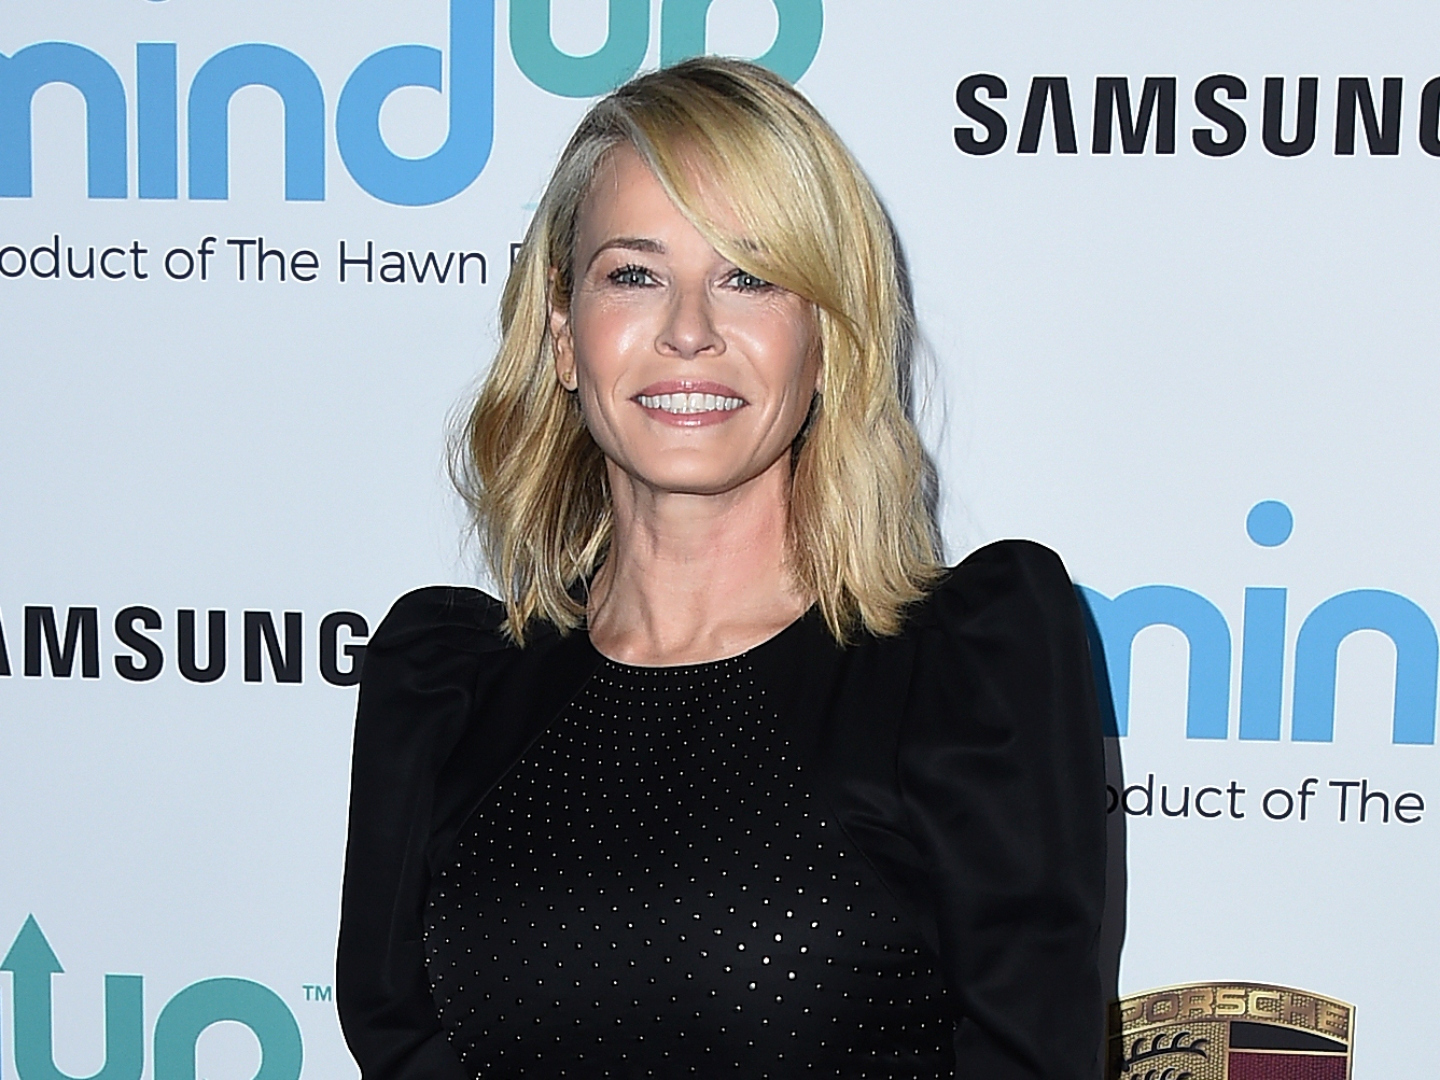 Chelsea Handler Details Her Star-Studded Jeffrey Epstein Experience With Prince Andrew